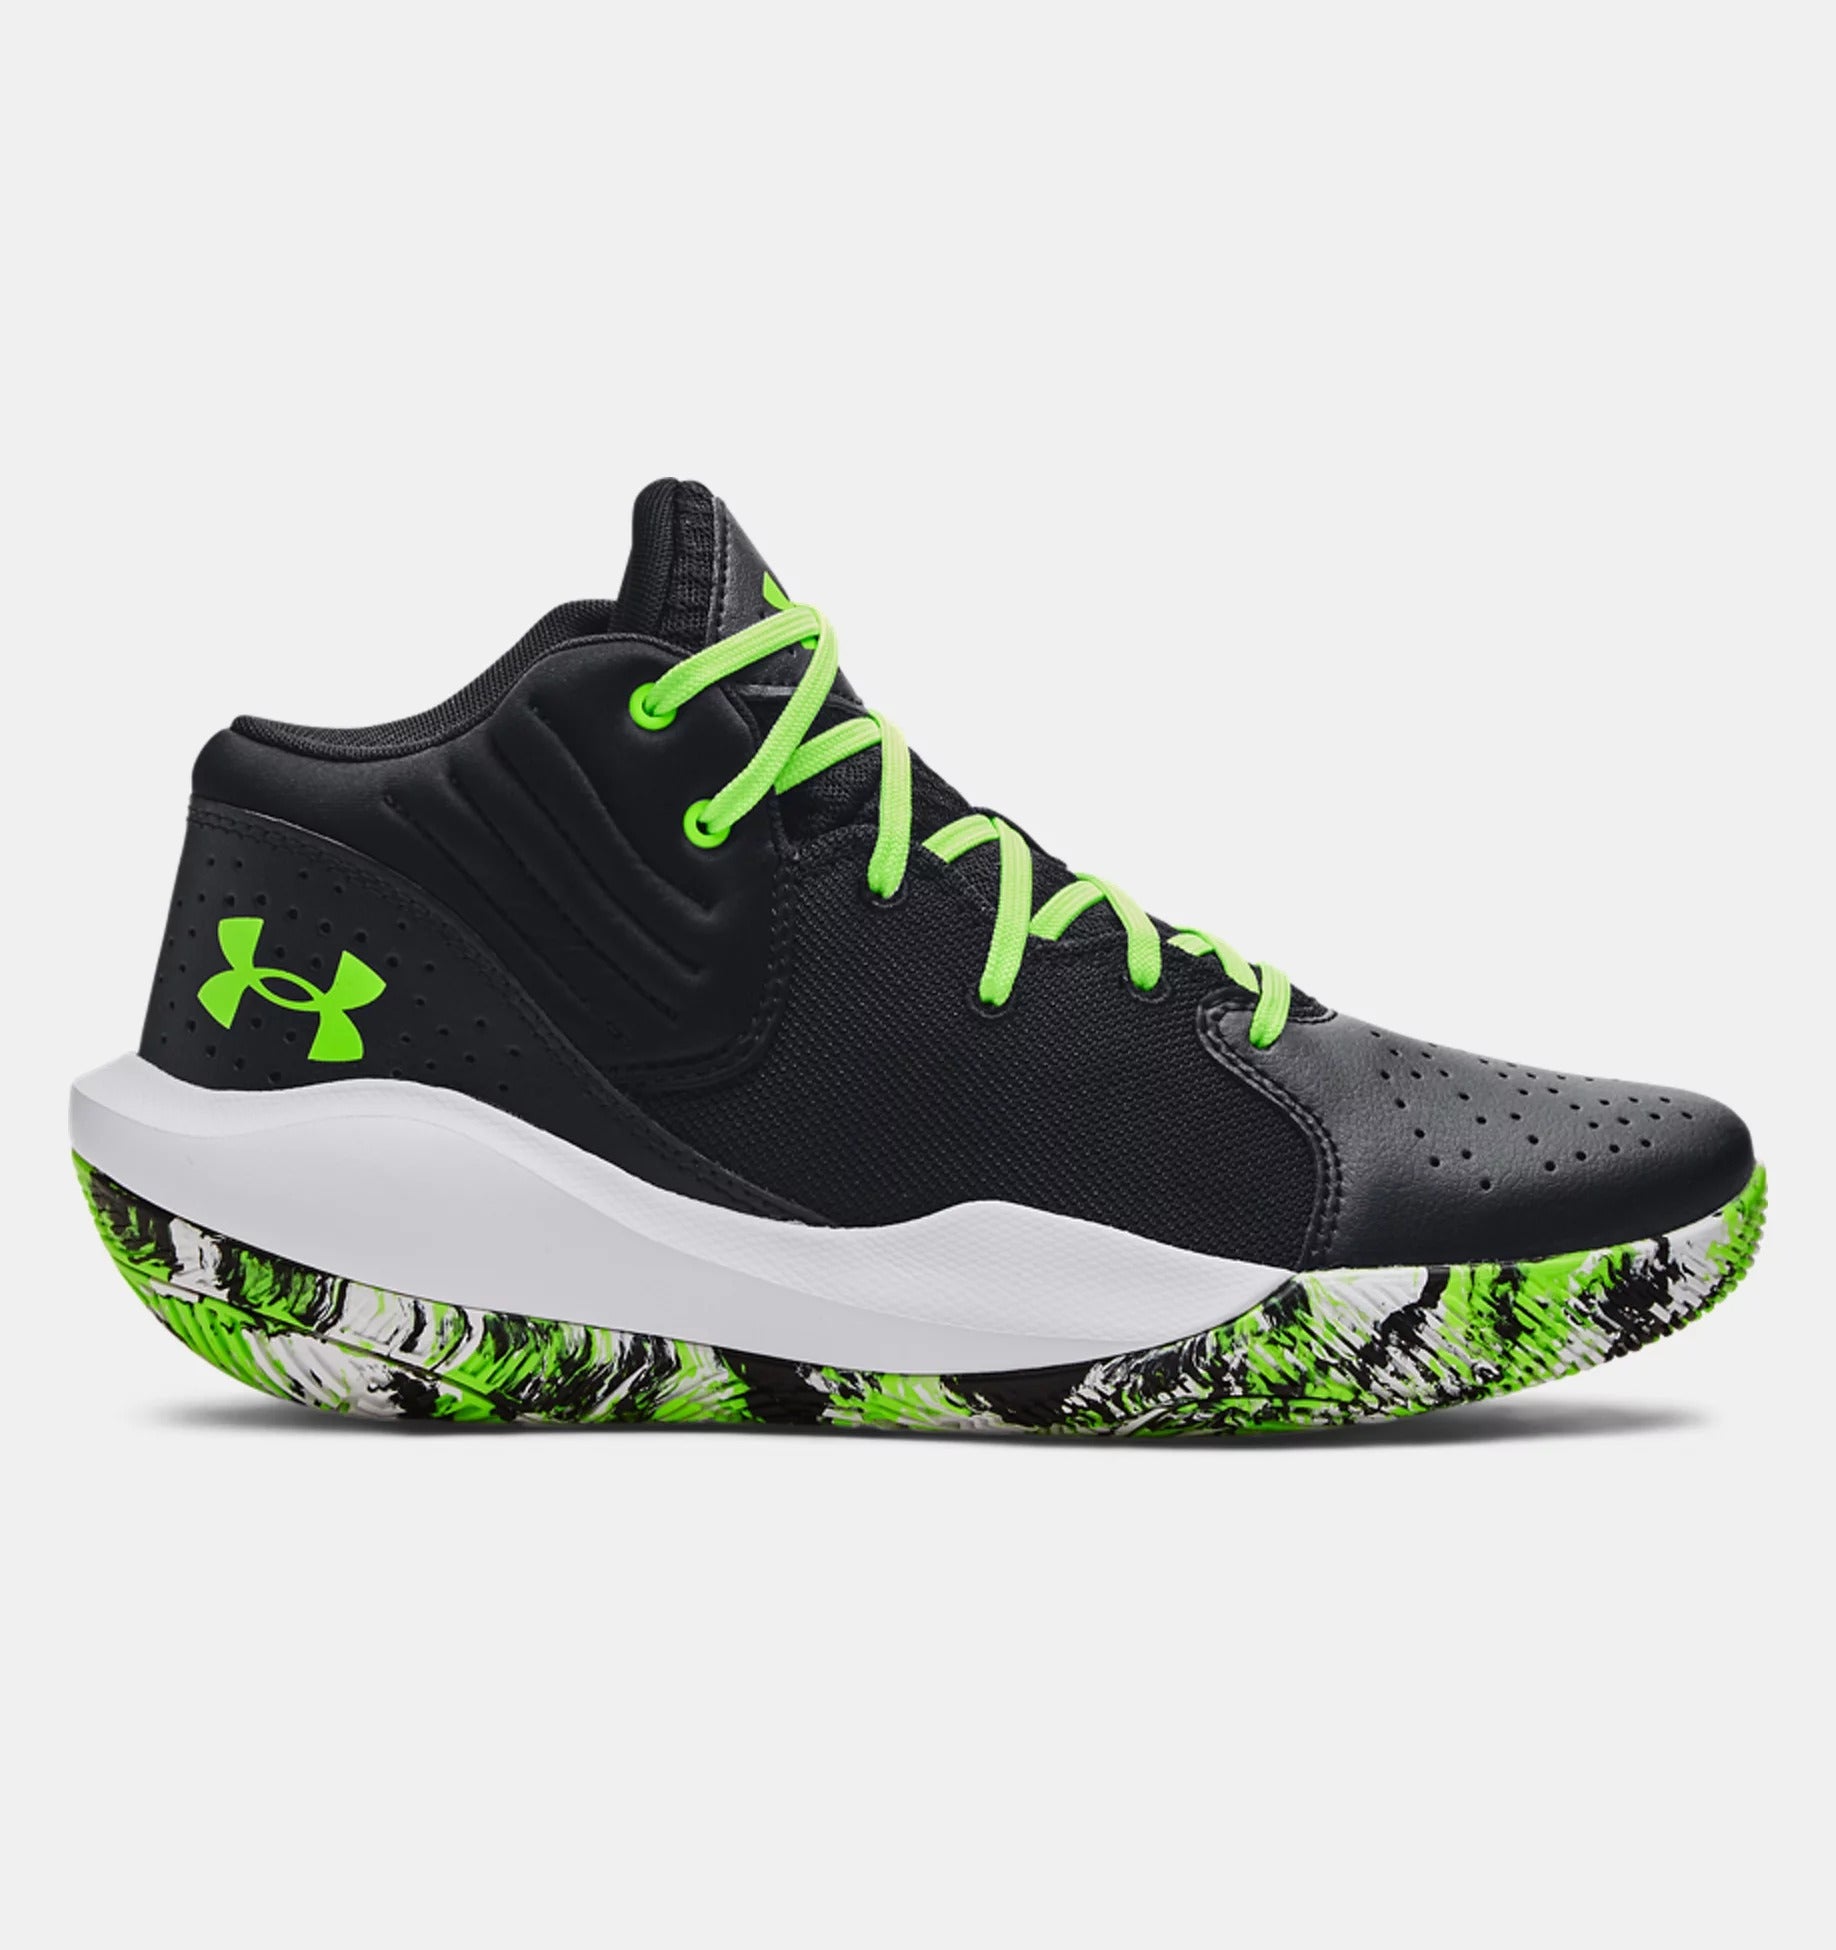 Under Armour Basketball Shoes for Women for sale